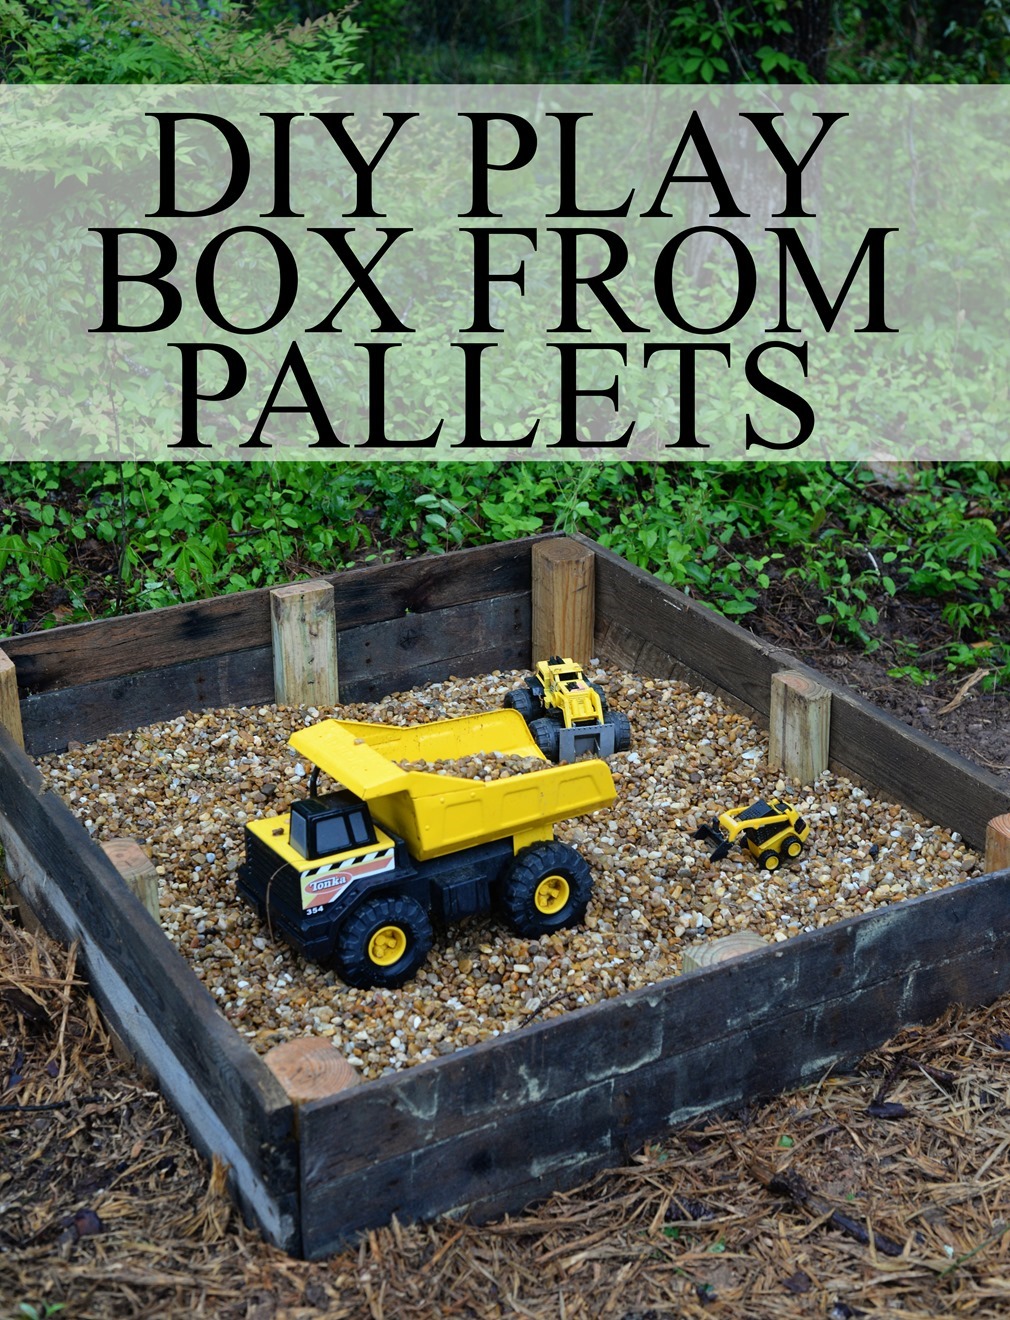 DIY play box from pallets